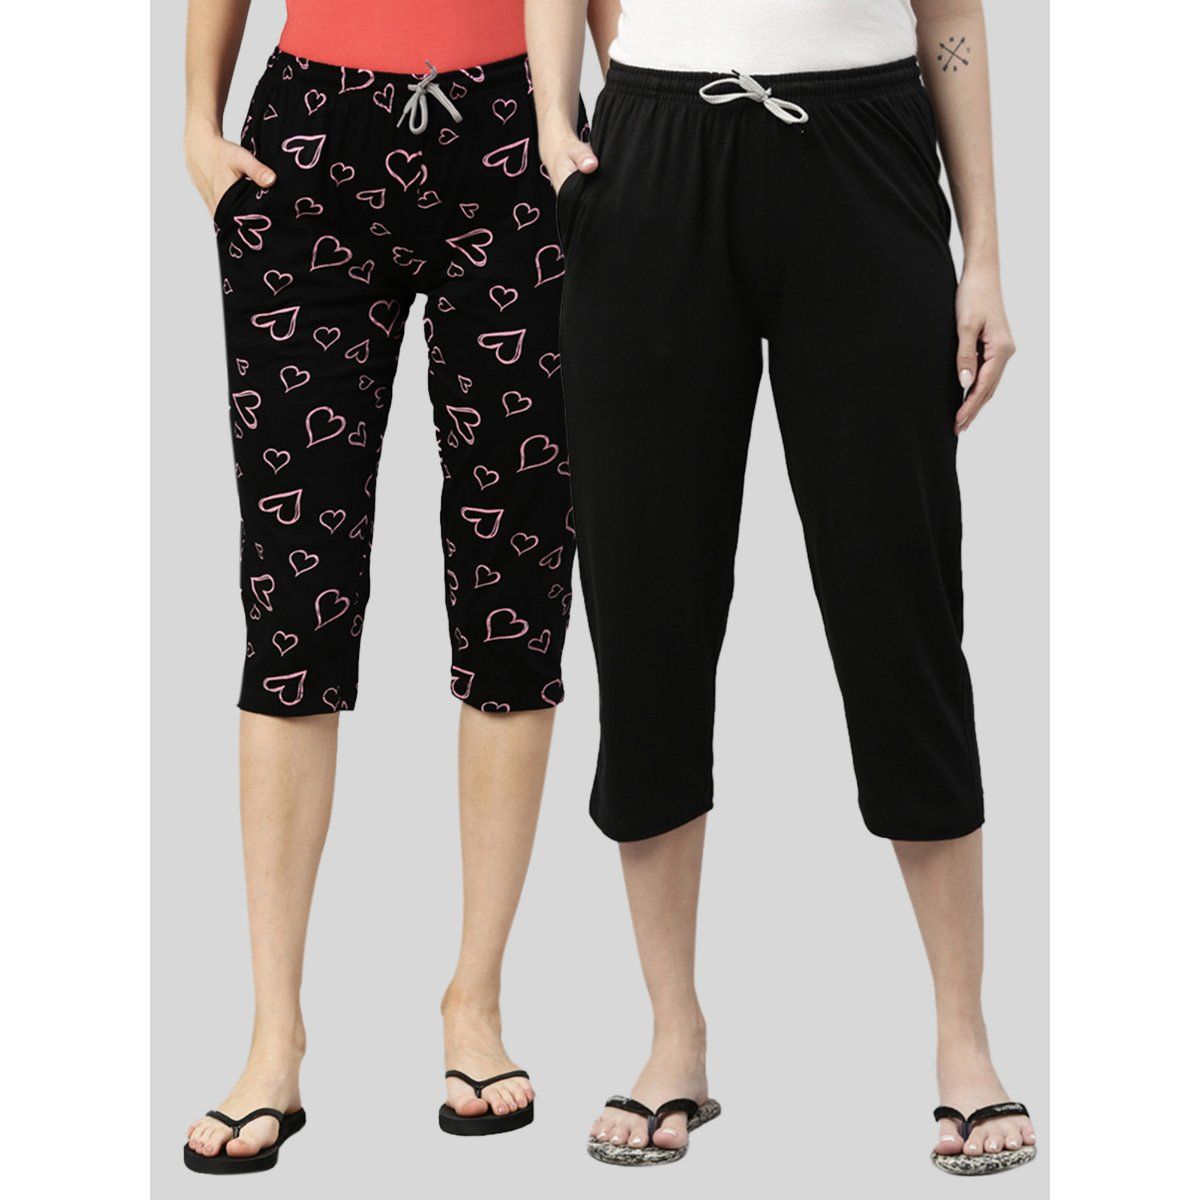 Cotton Black Capris For Women's, Design/Pattern: Solid at Rs 299/piece in  New Delhi